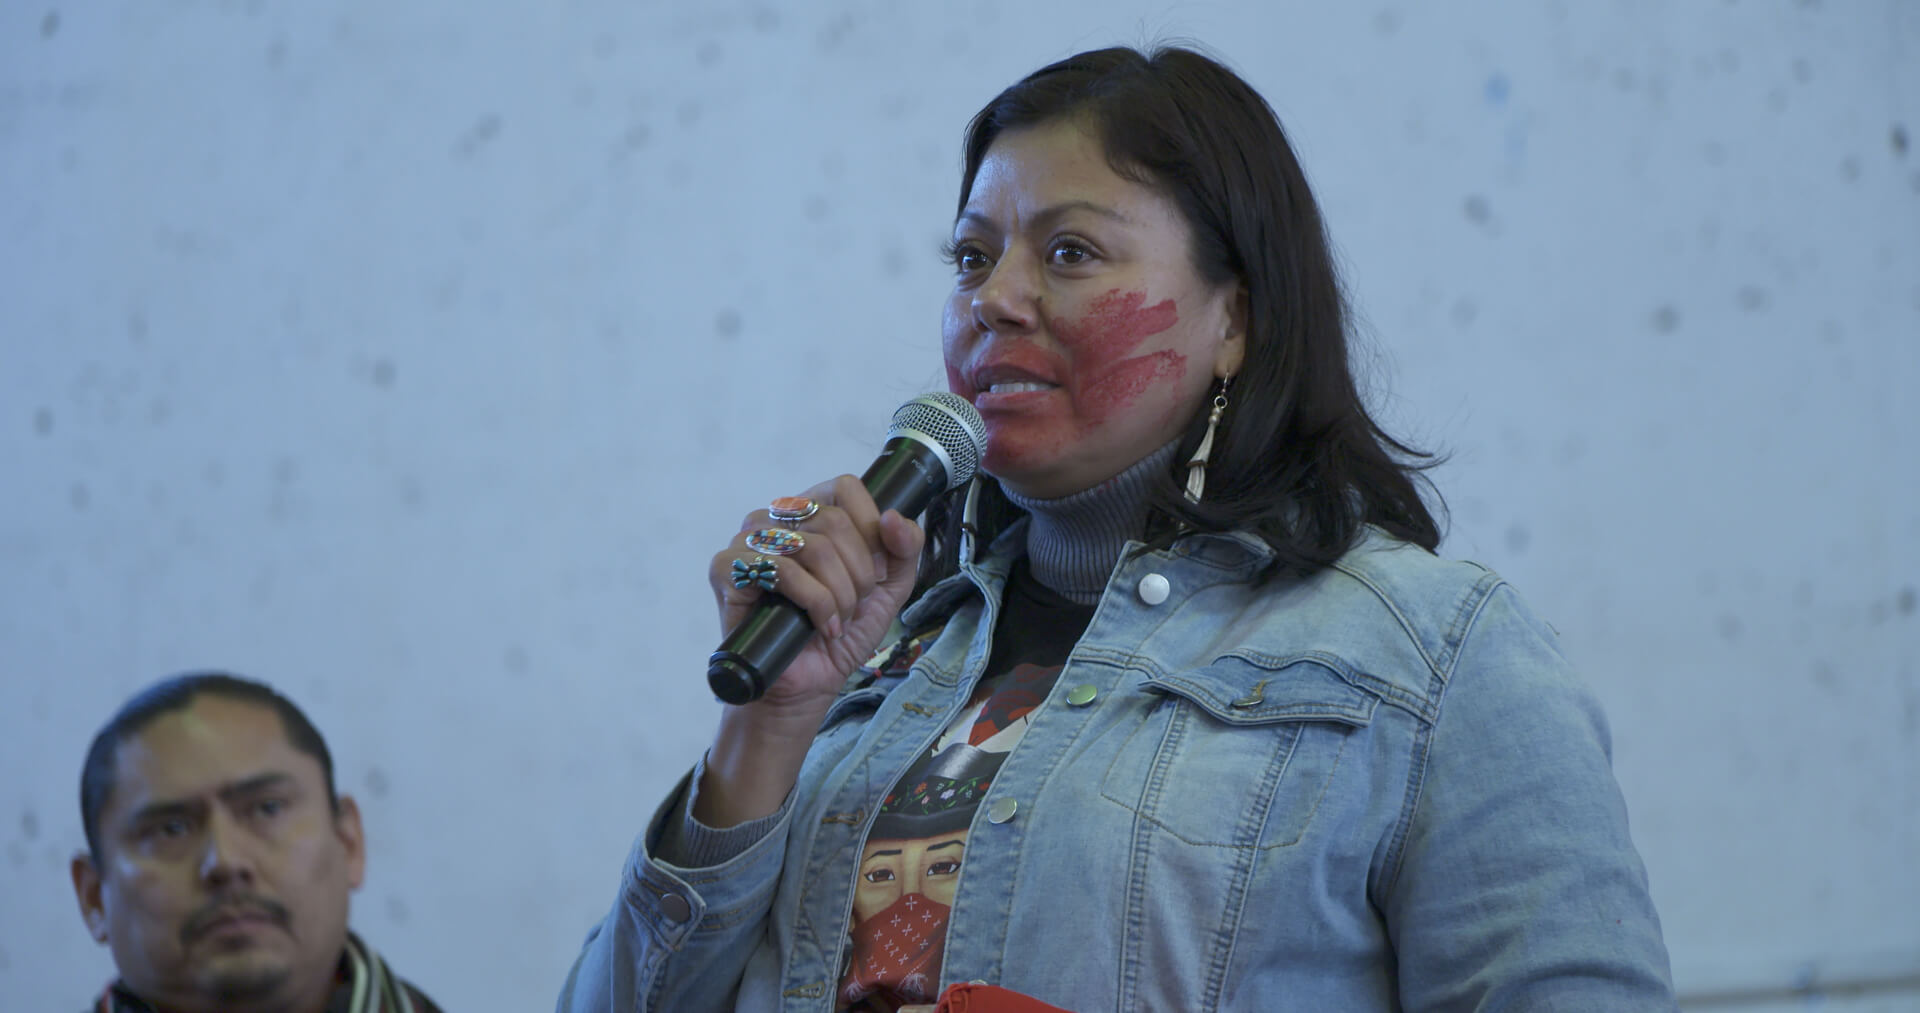 Rep. Ruth Buffalo speaking at the 5th Annual Missing and Murdered Indigenous Women March, Minneapolis, MN Photo by: Michael Phillips